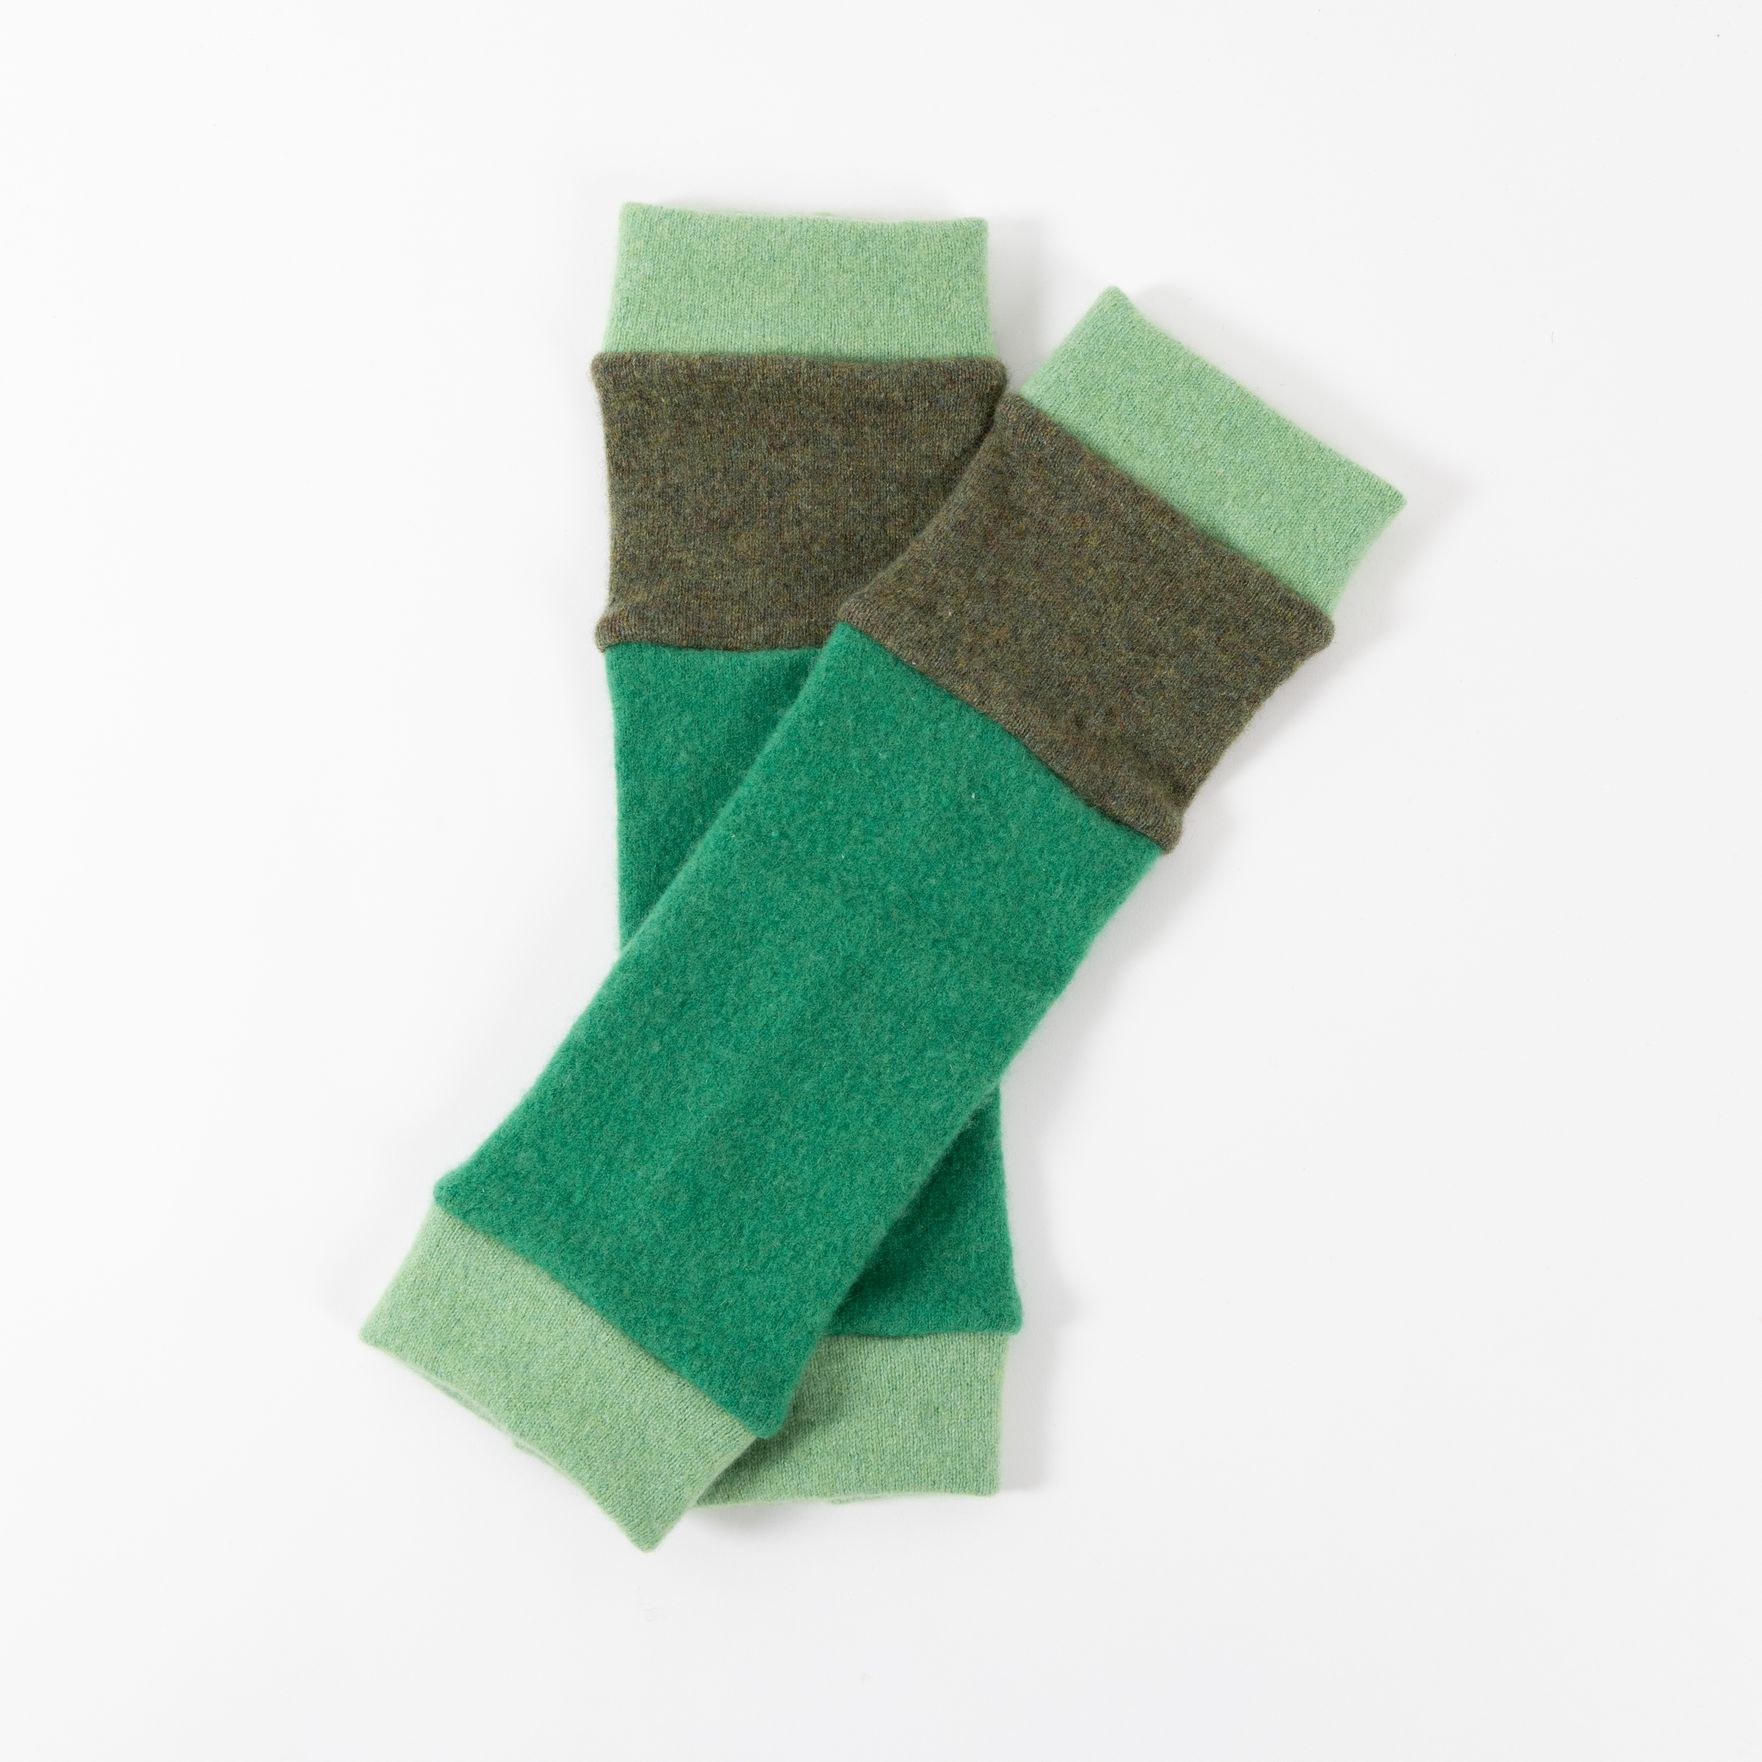 Cashmere Ankle Warmers